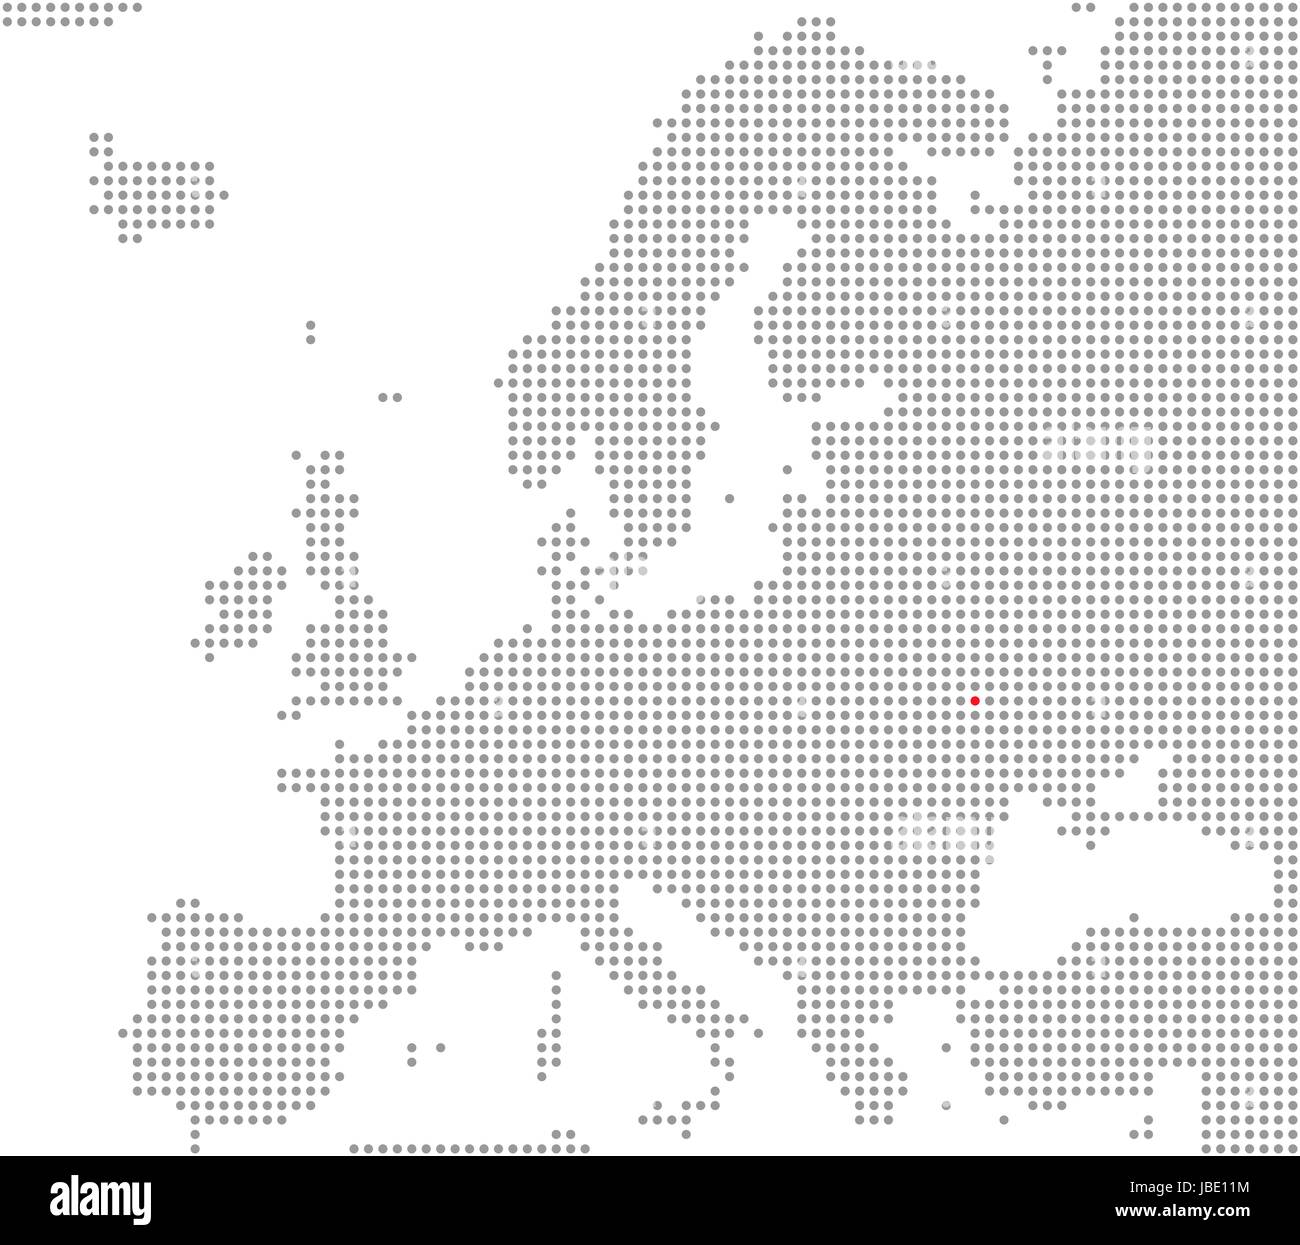 pixel map europe: kiev is located here Stock Photo